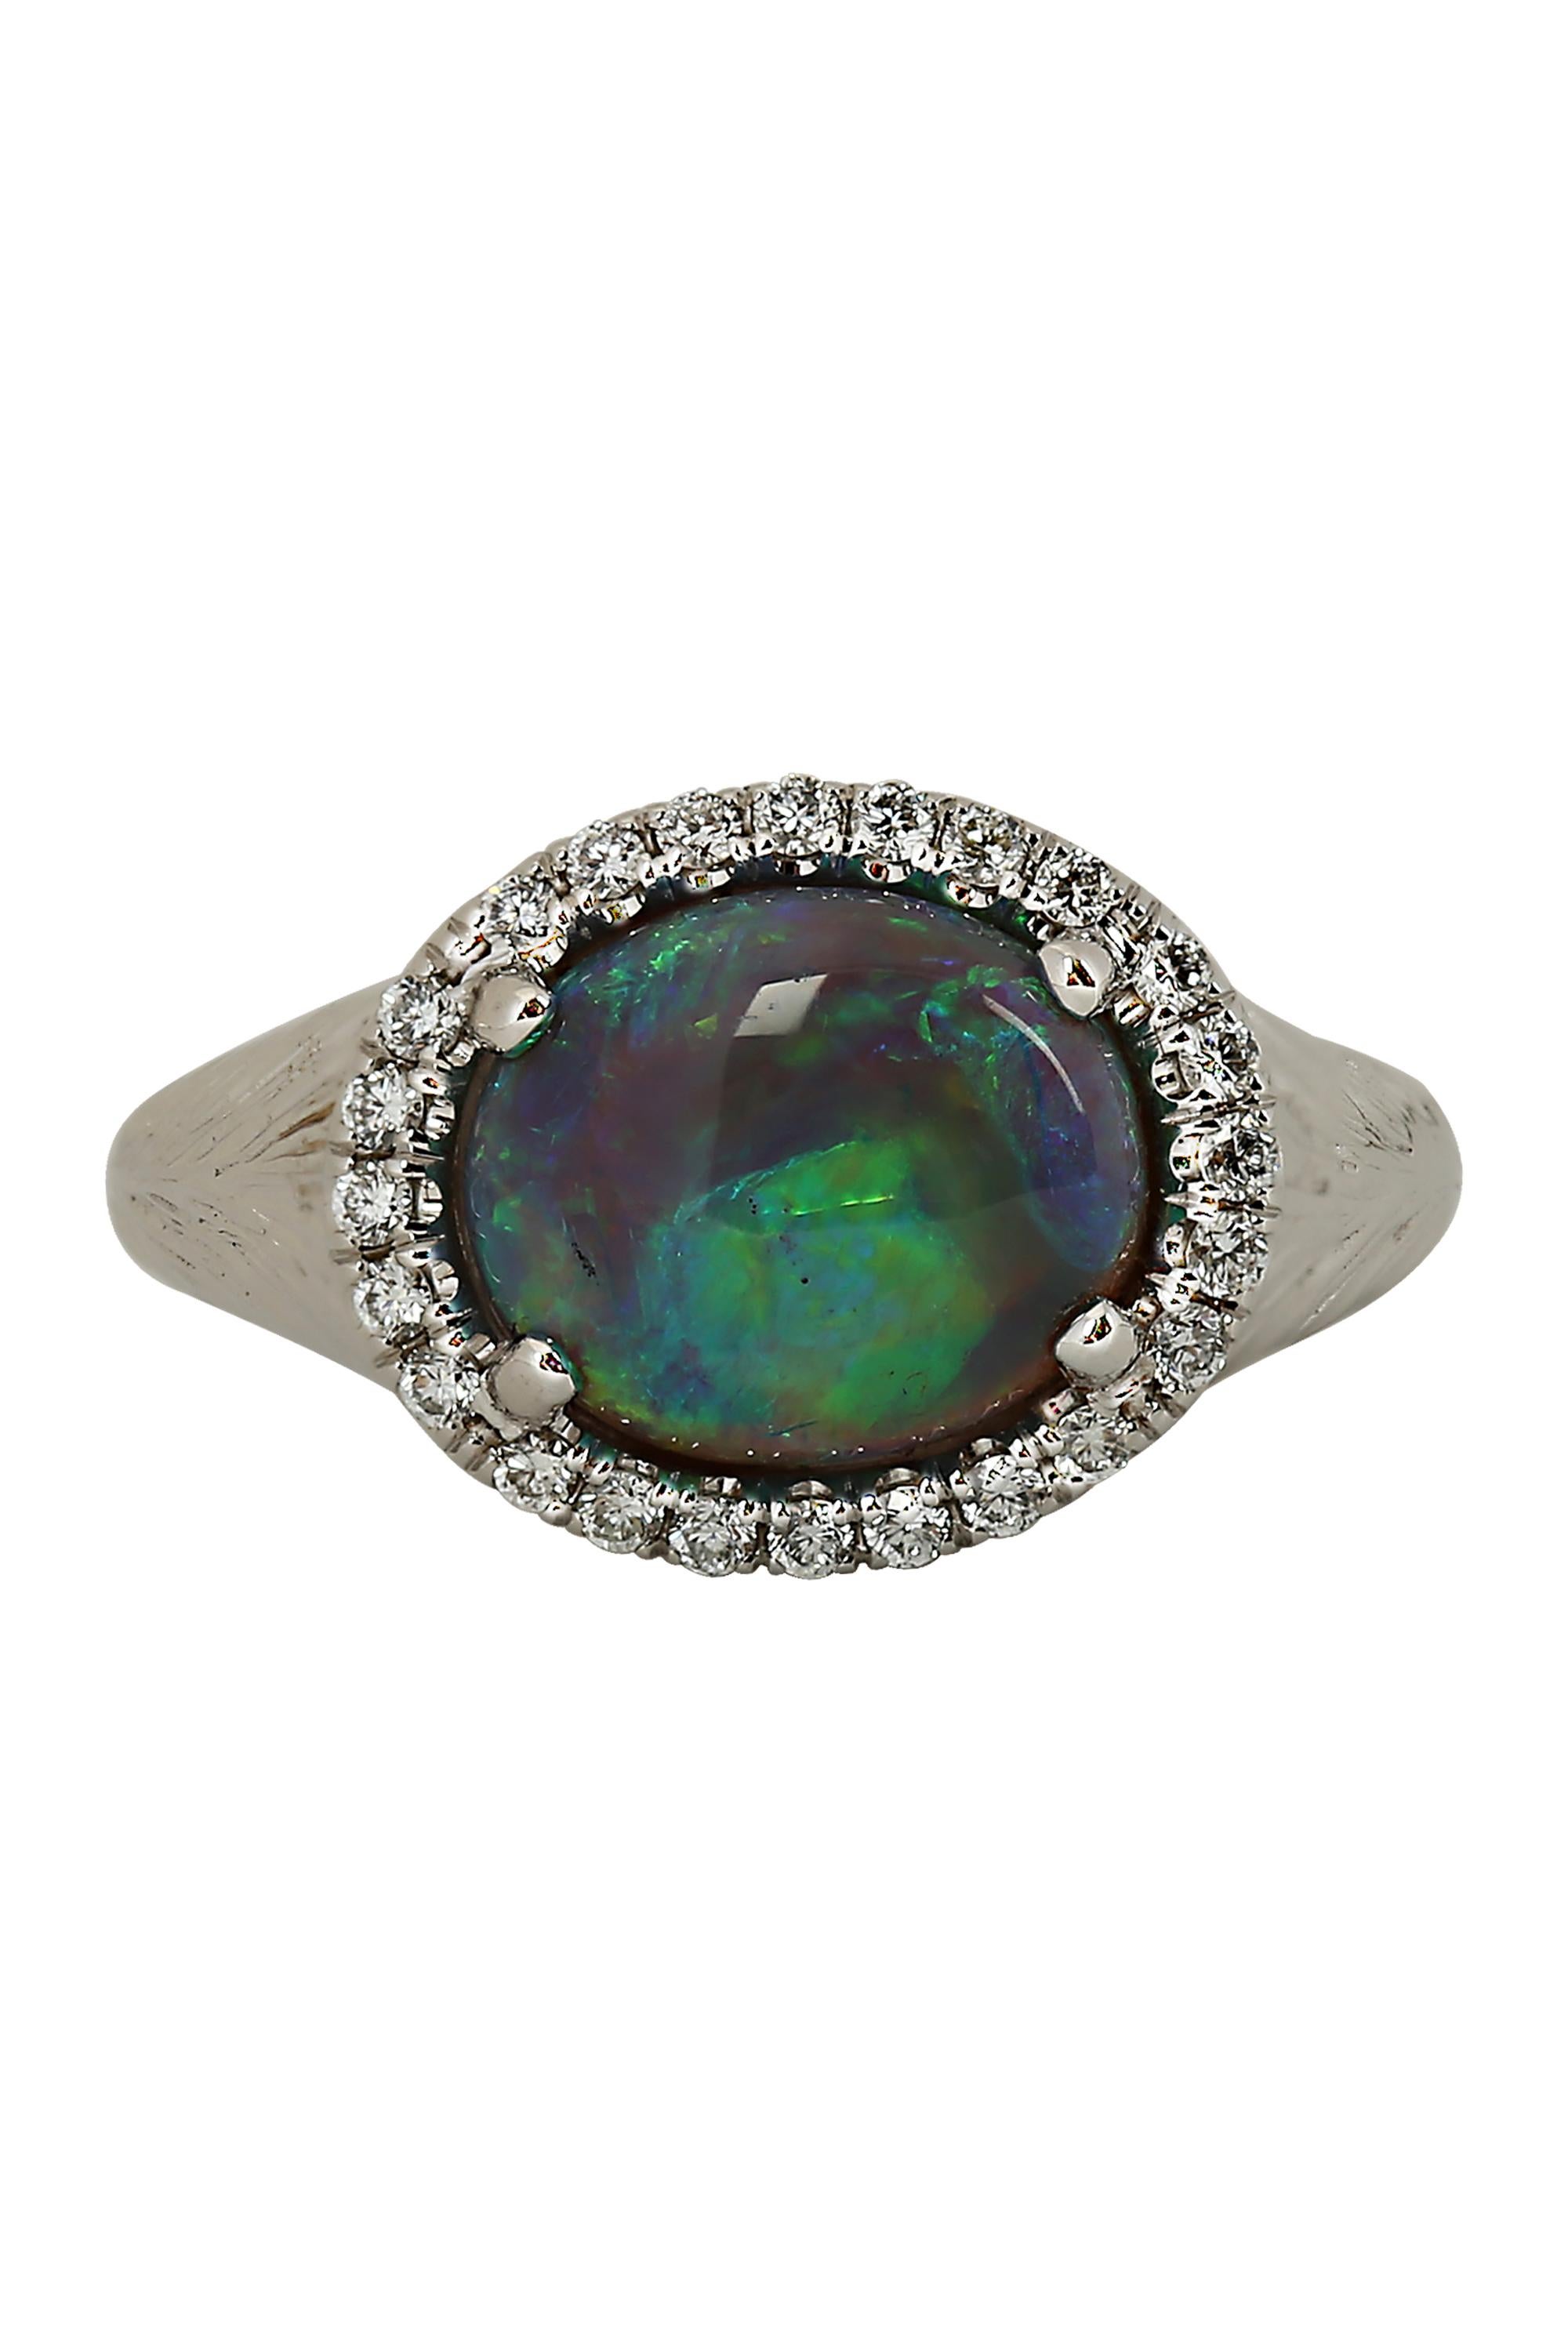 Oval Cut Gems Are Forever 3.65 Carat Black Opal and Diamond Ring For Sale